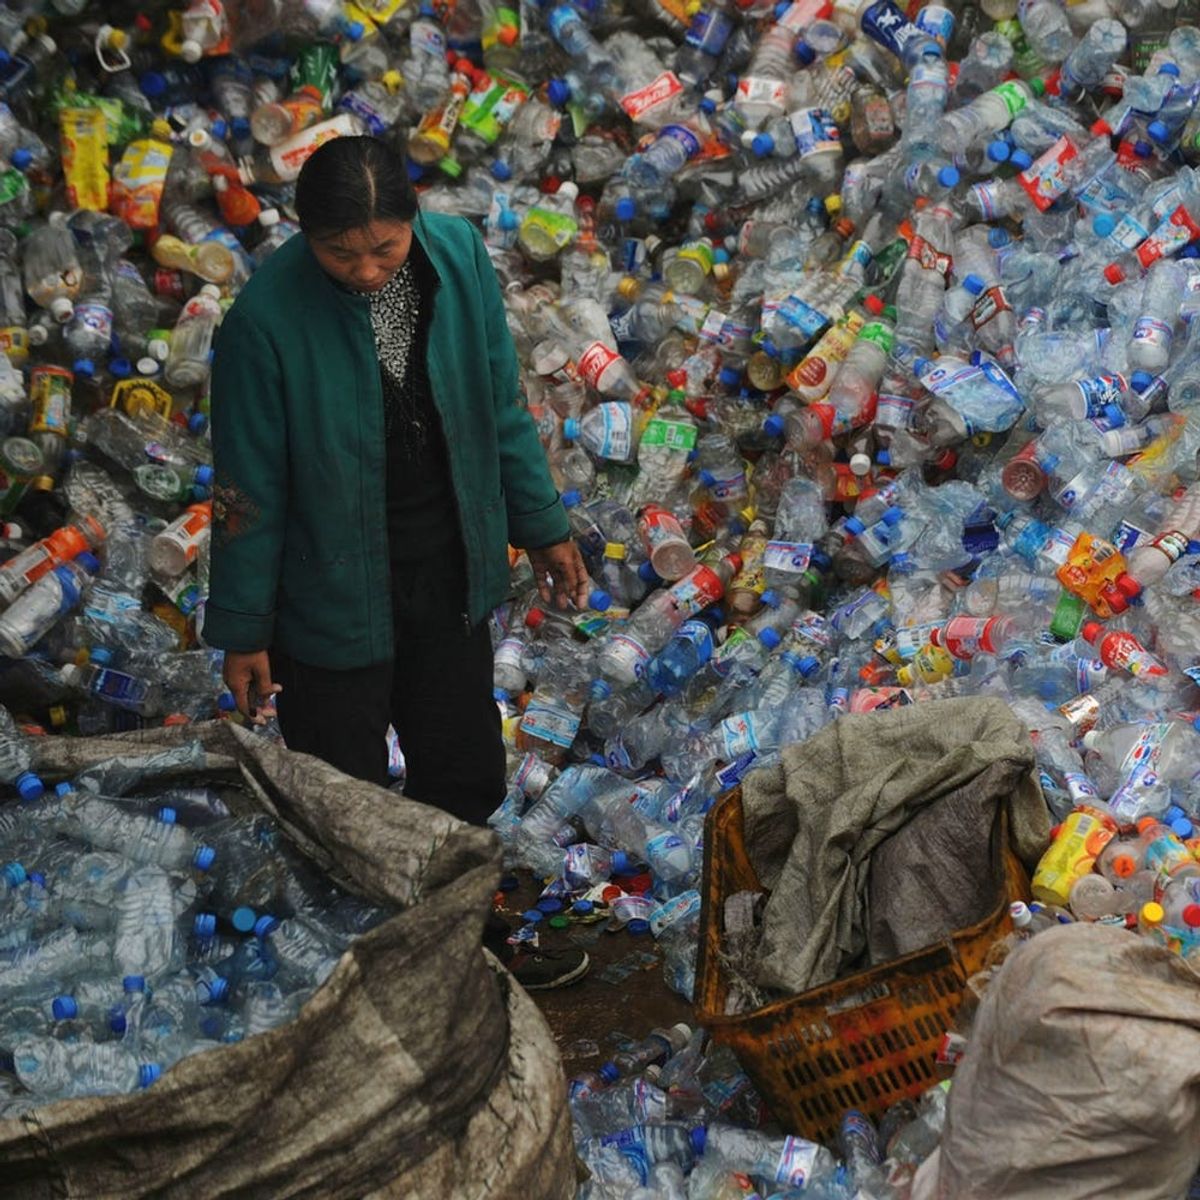 Why Hundreds of Cities Across the US Have Quietly Stopped Recycling